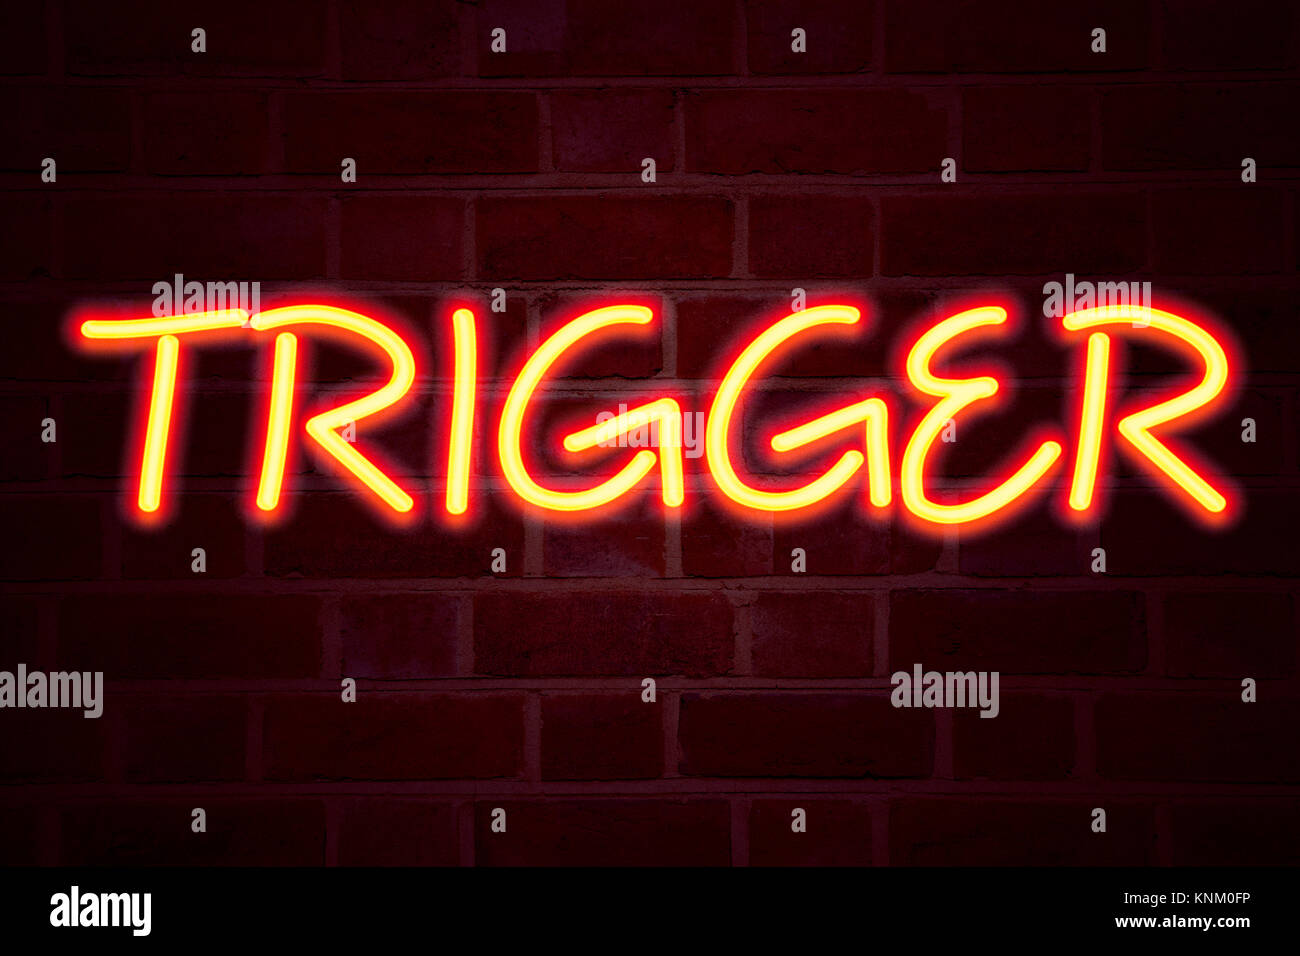 Trigger Neon Sign On Brick Wall Background Fluorescent Neon Tube Sign On Brickwork Business 